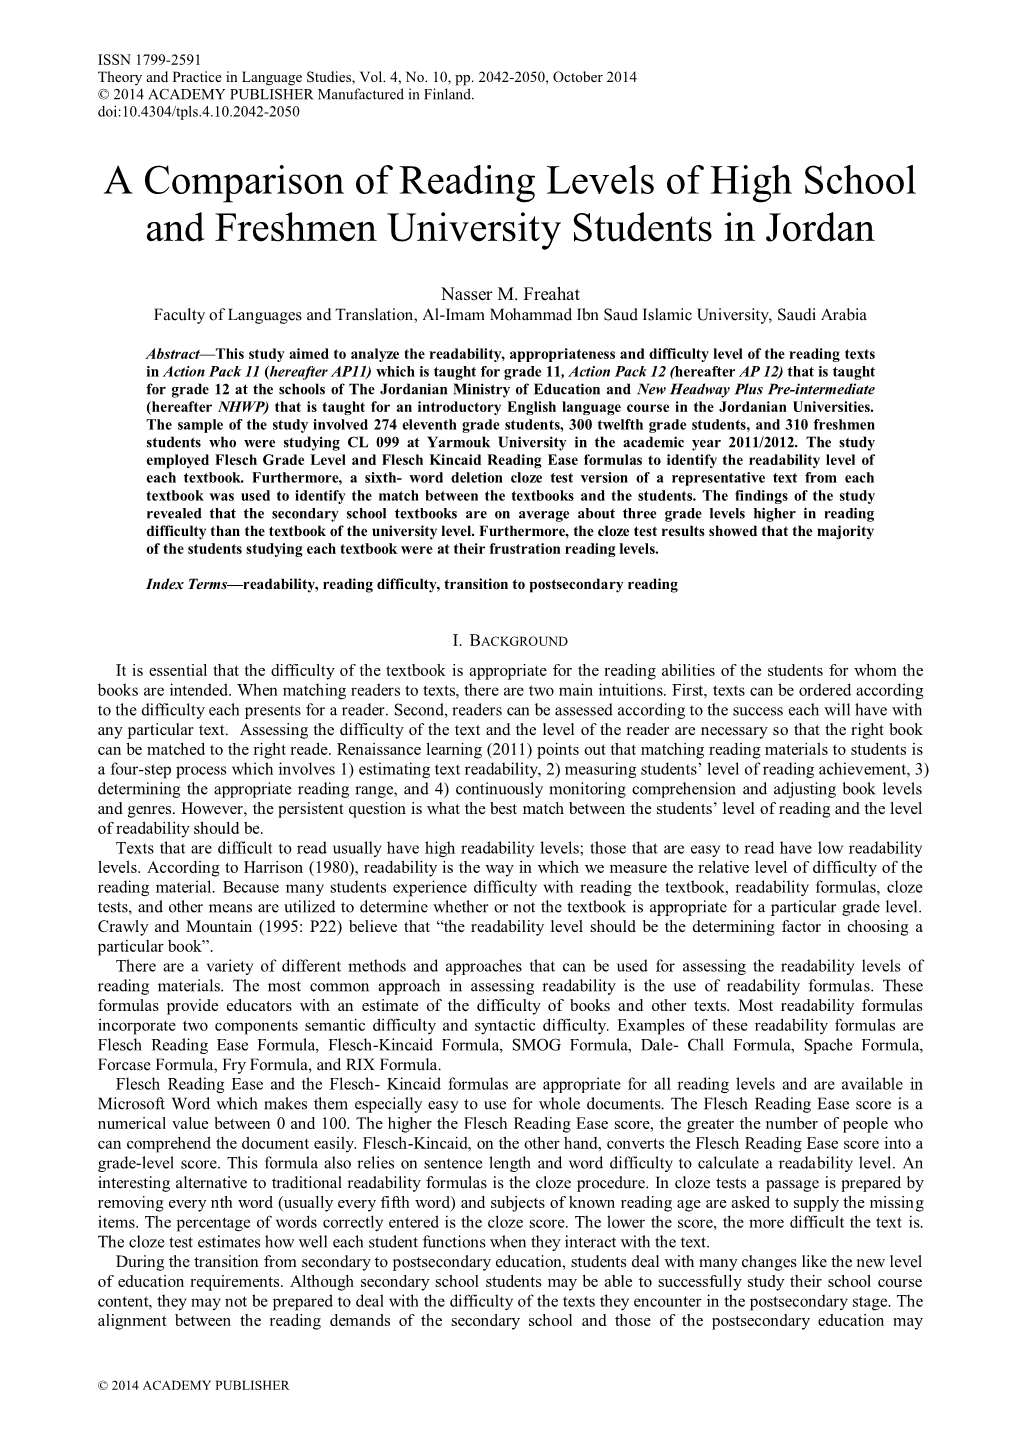 A Comparison of Reading Levels of High School and Freshmen University Students in Jordan